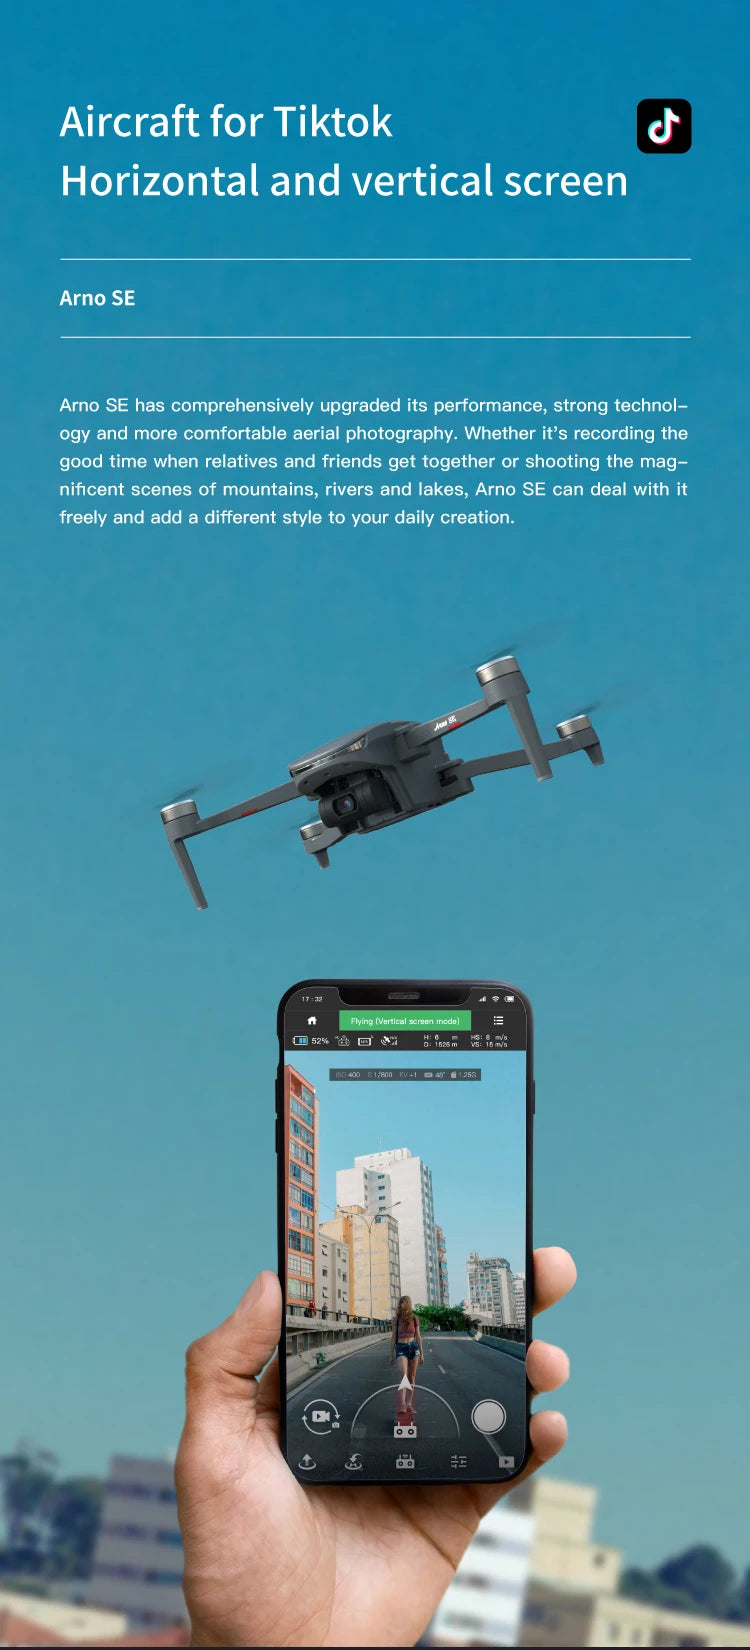 C-FLY Arno SE MAX Drone, Arno SE has comprehensively upgraded its performance, strong technol - og